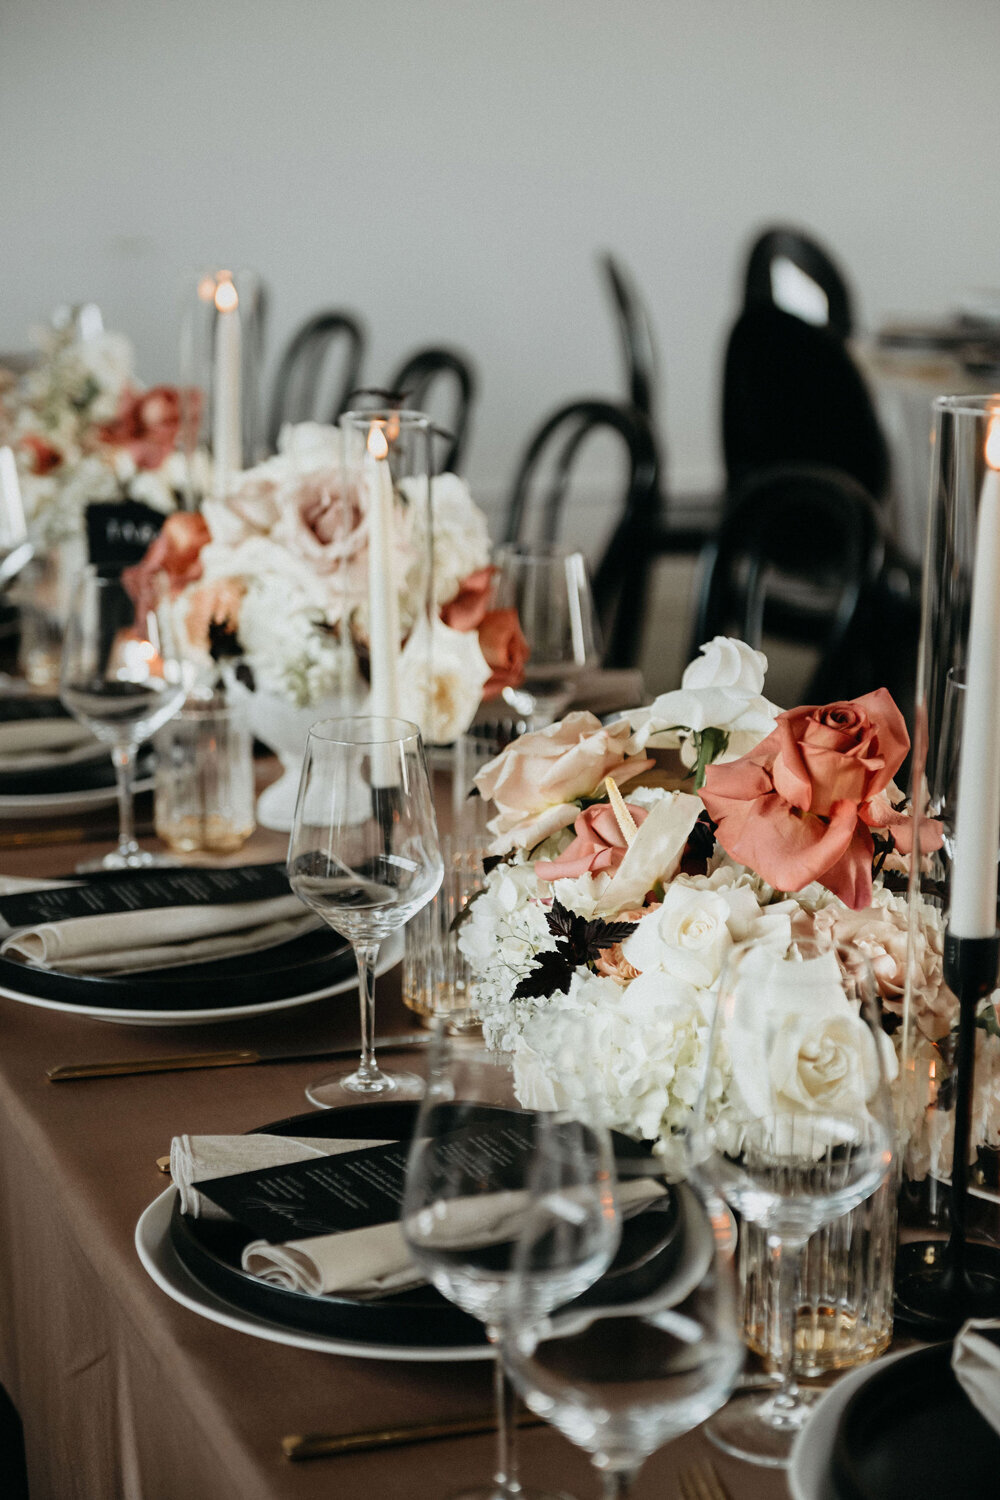 Wedding reception tablescape in black,pink and white.